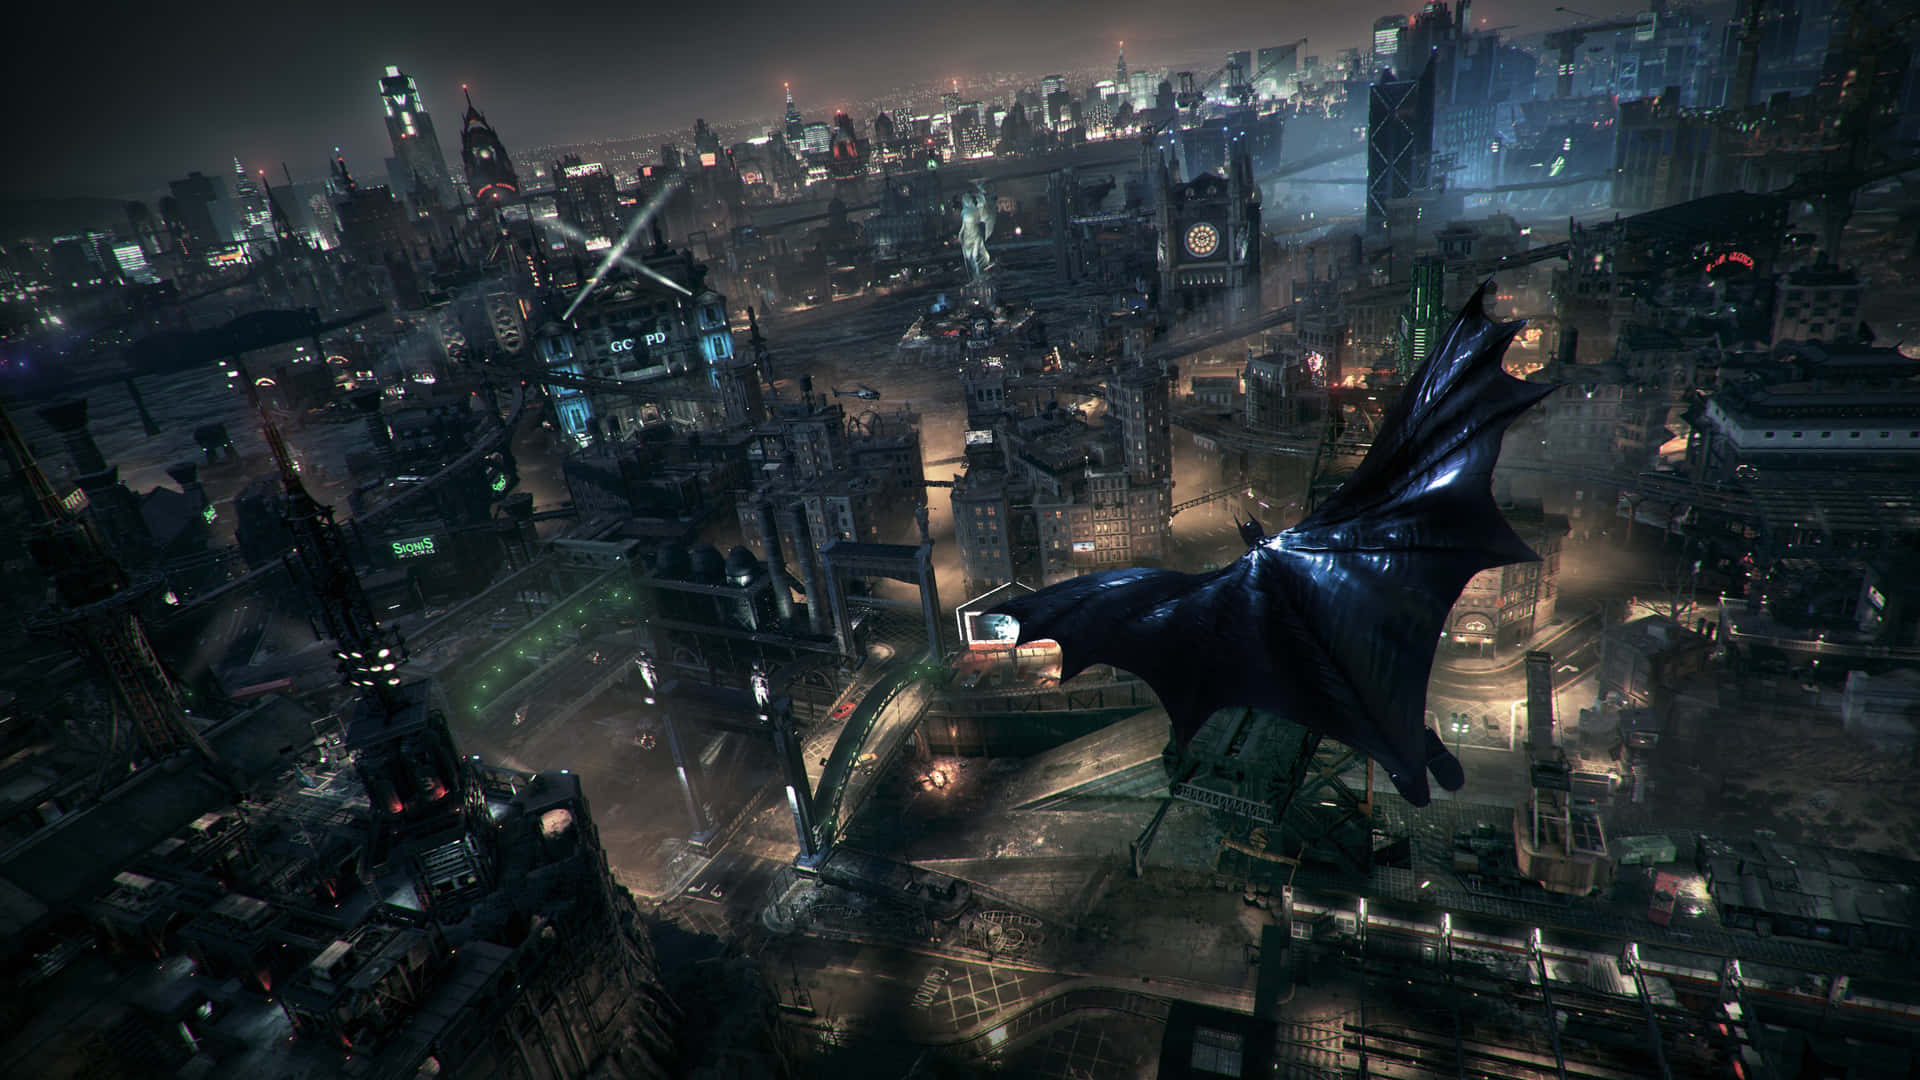 The Caped Crusader is ready for action in the Batman Arkham Knight 4k world. Wallpaper